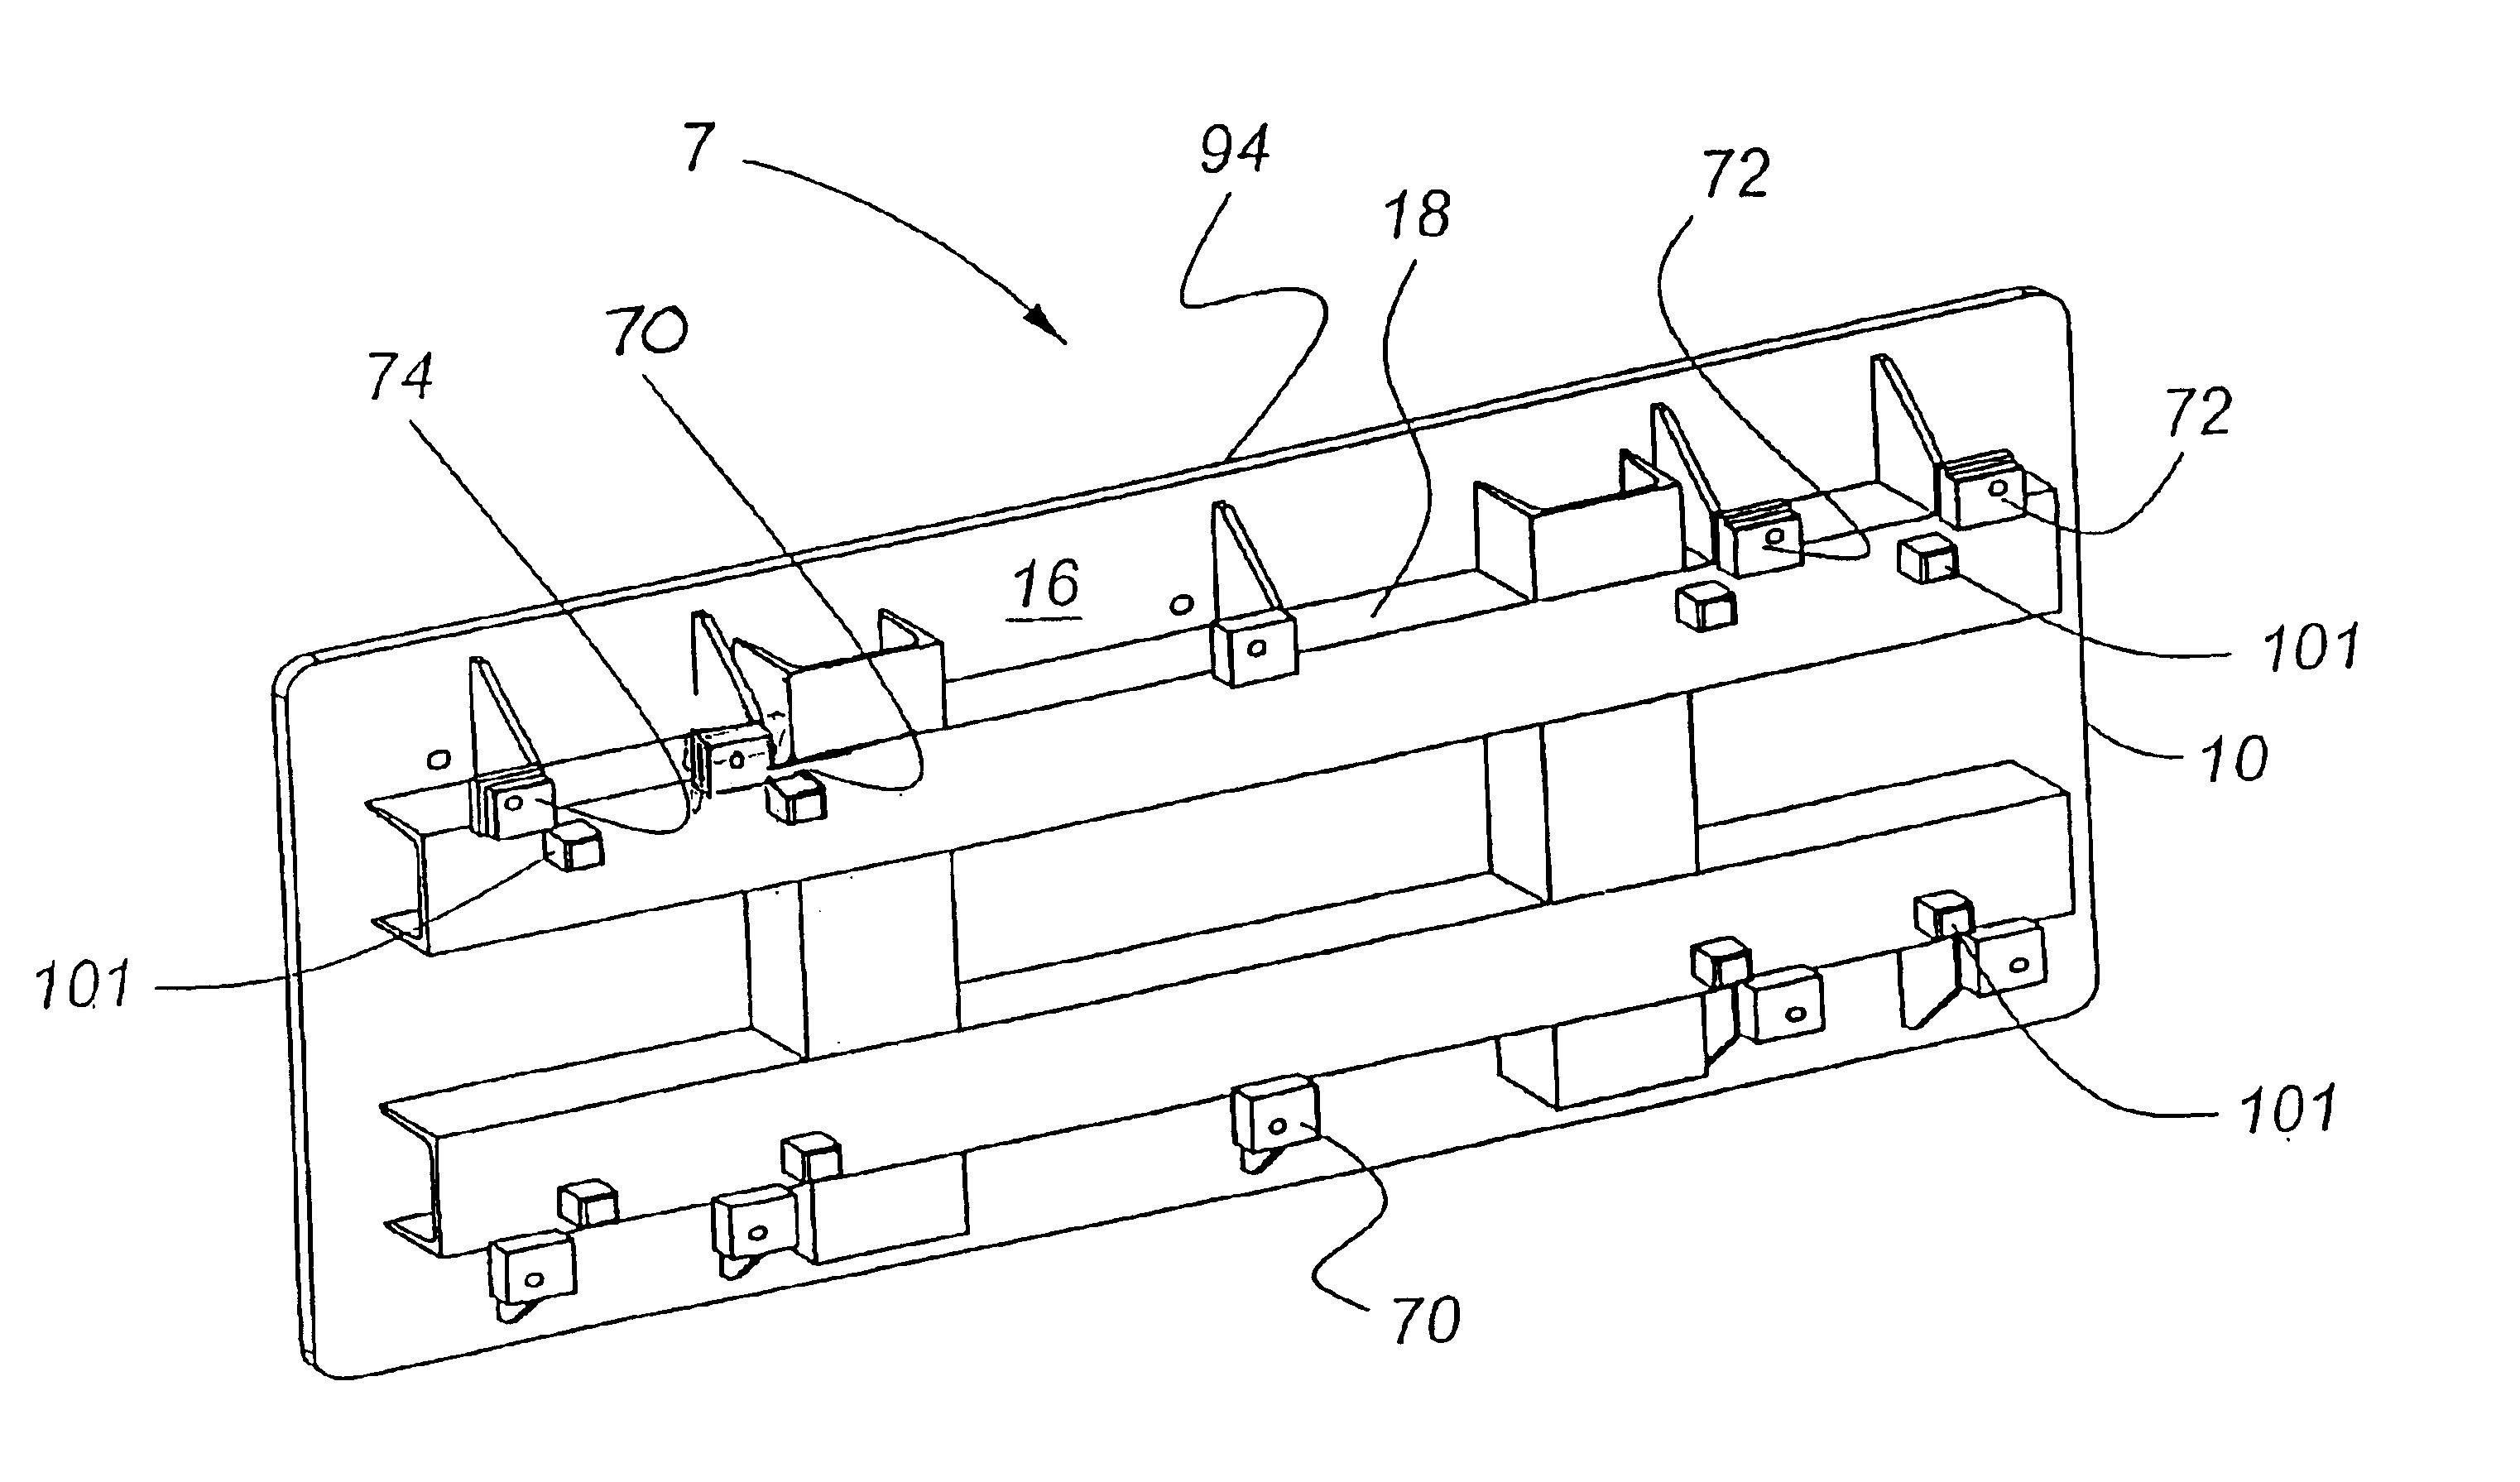 Tooling plate for a flexible manufacturing system